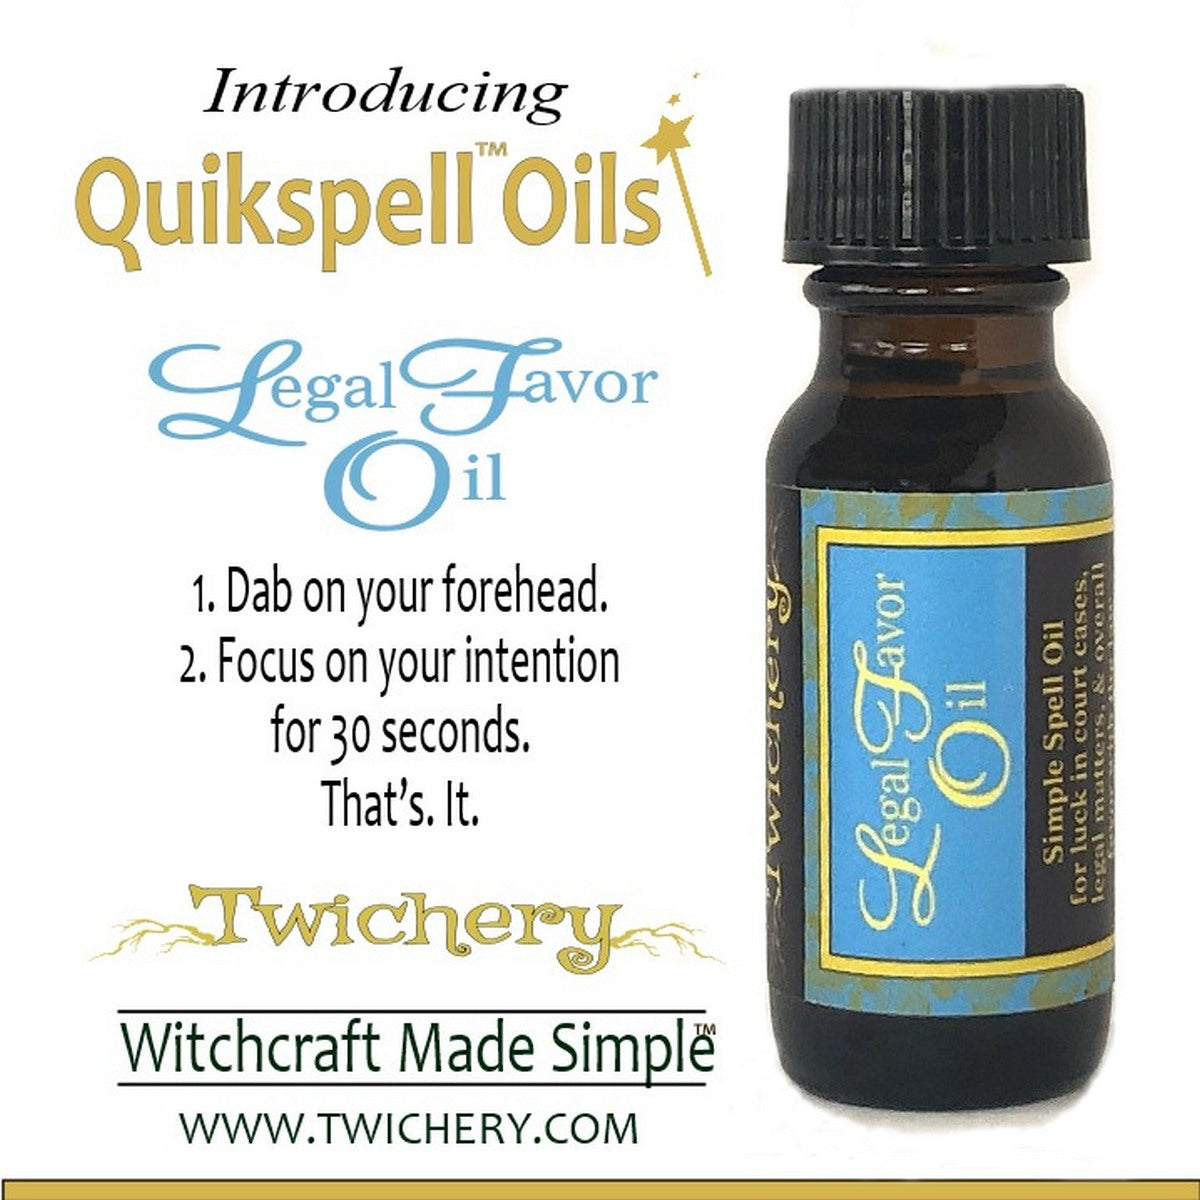 Twichery Legal Favor Quikspell Oil for victory in a pinch in court cases and dealings with law enforcement, Hoodoo, voodoo, wicca, pagan, Witchcraft Made Simple Twichery